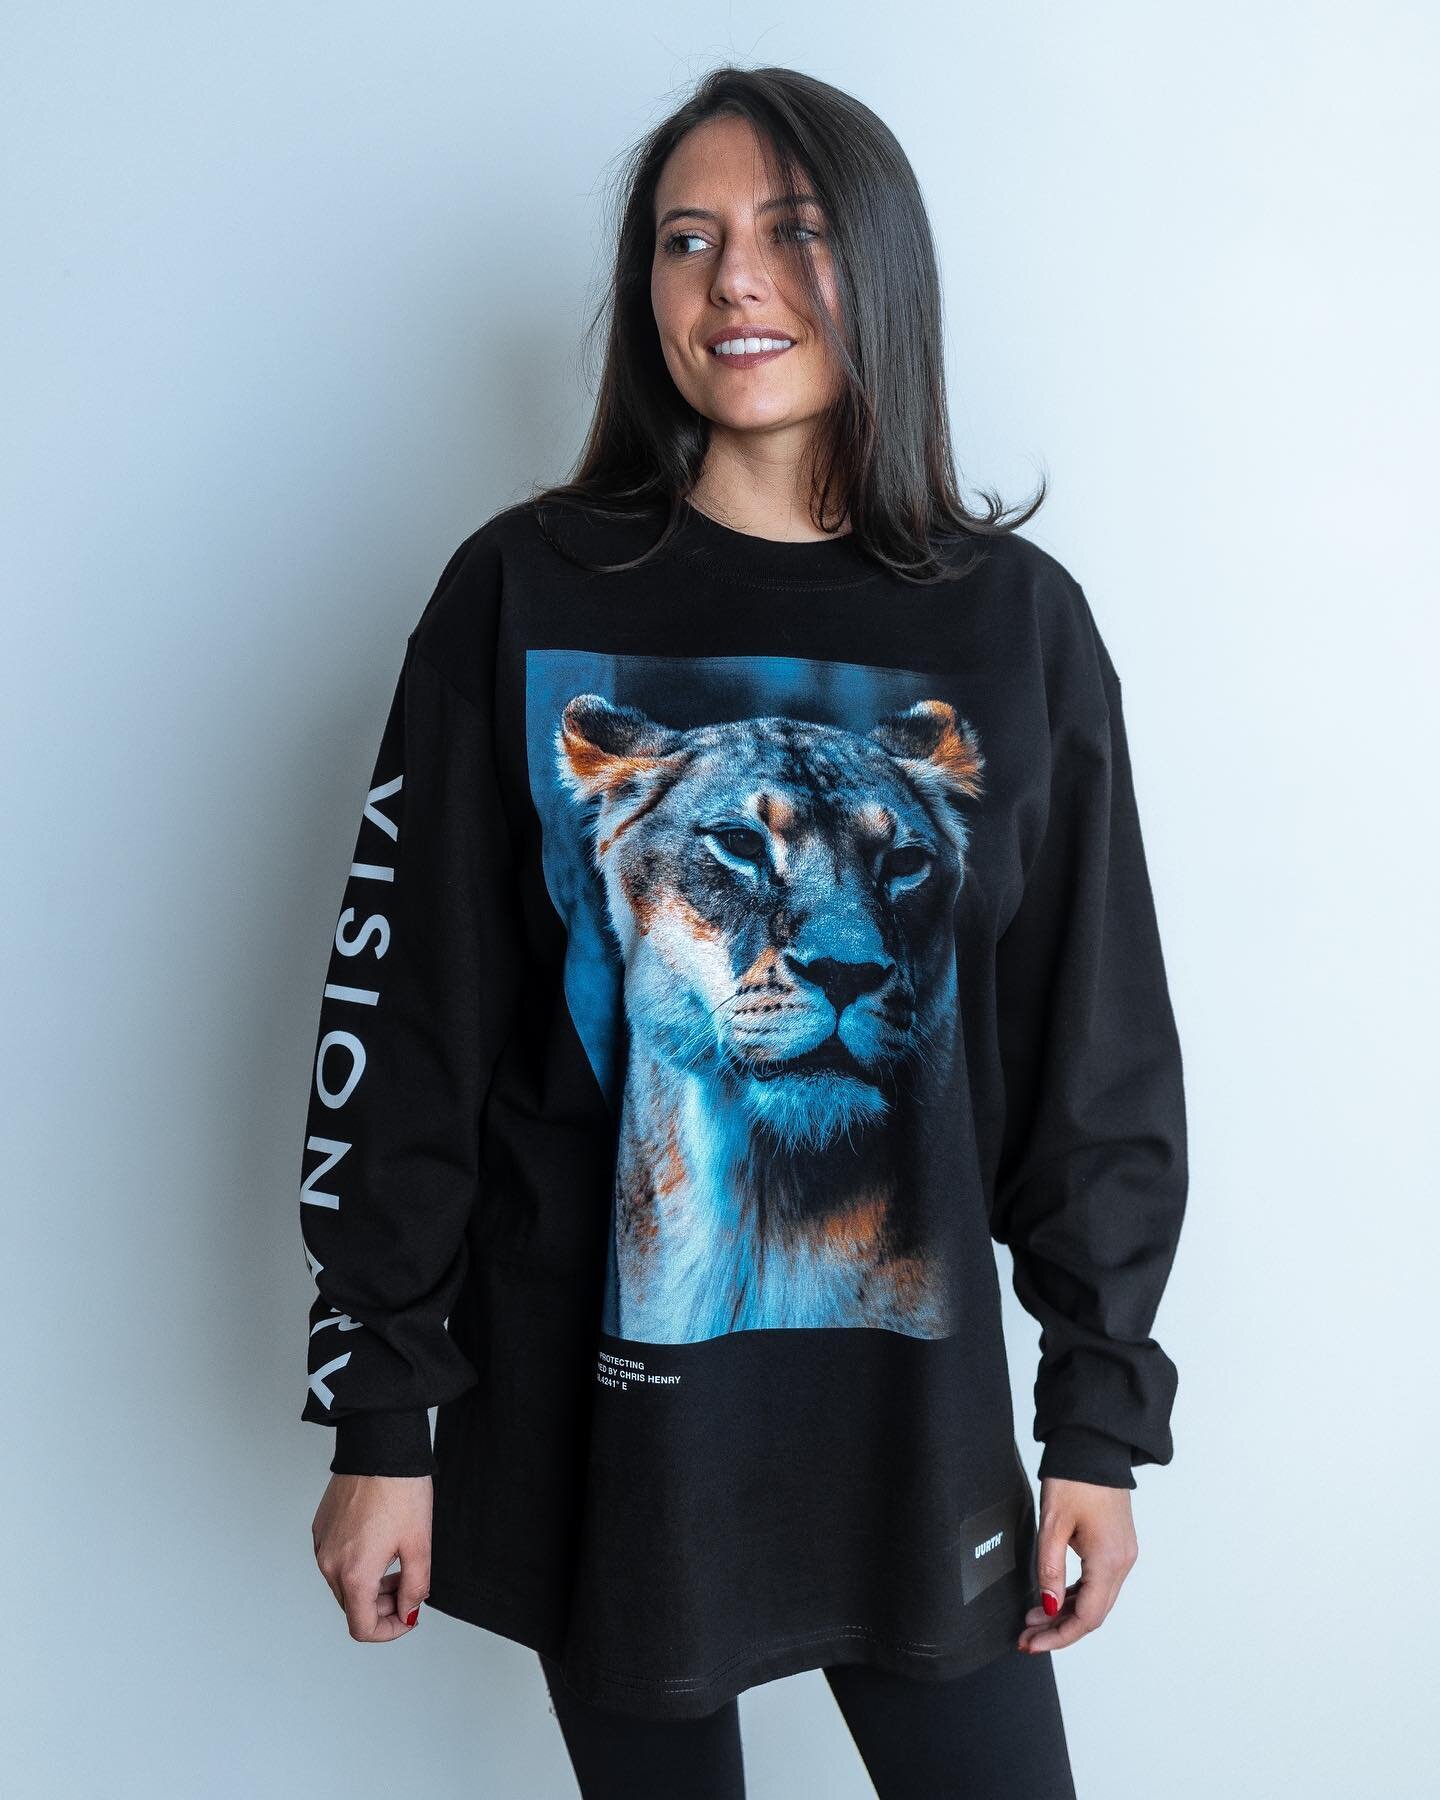 Our best-seller this season, the Lionness tee, photographed by @chrishenry and available on our website. Onward!